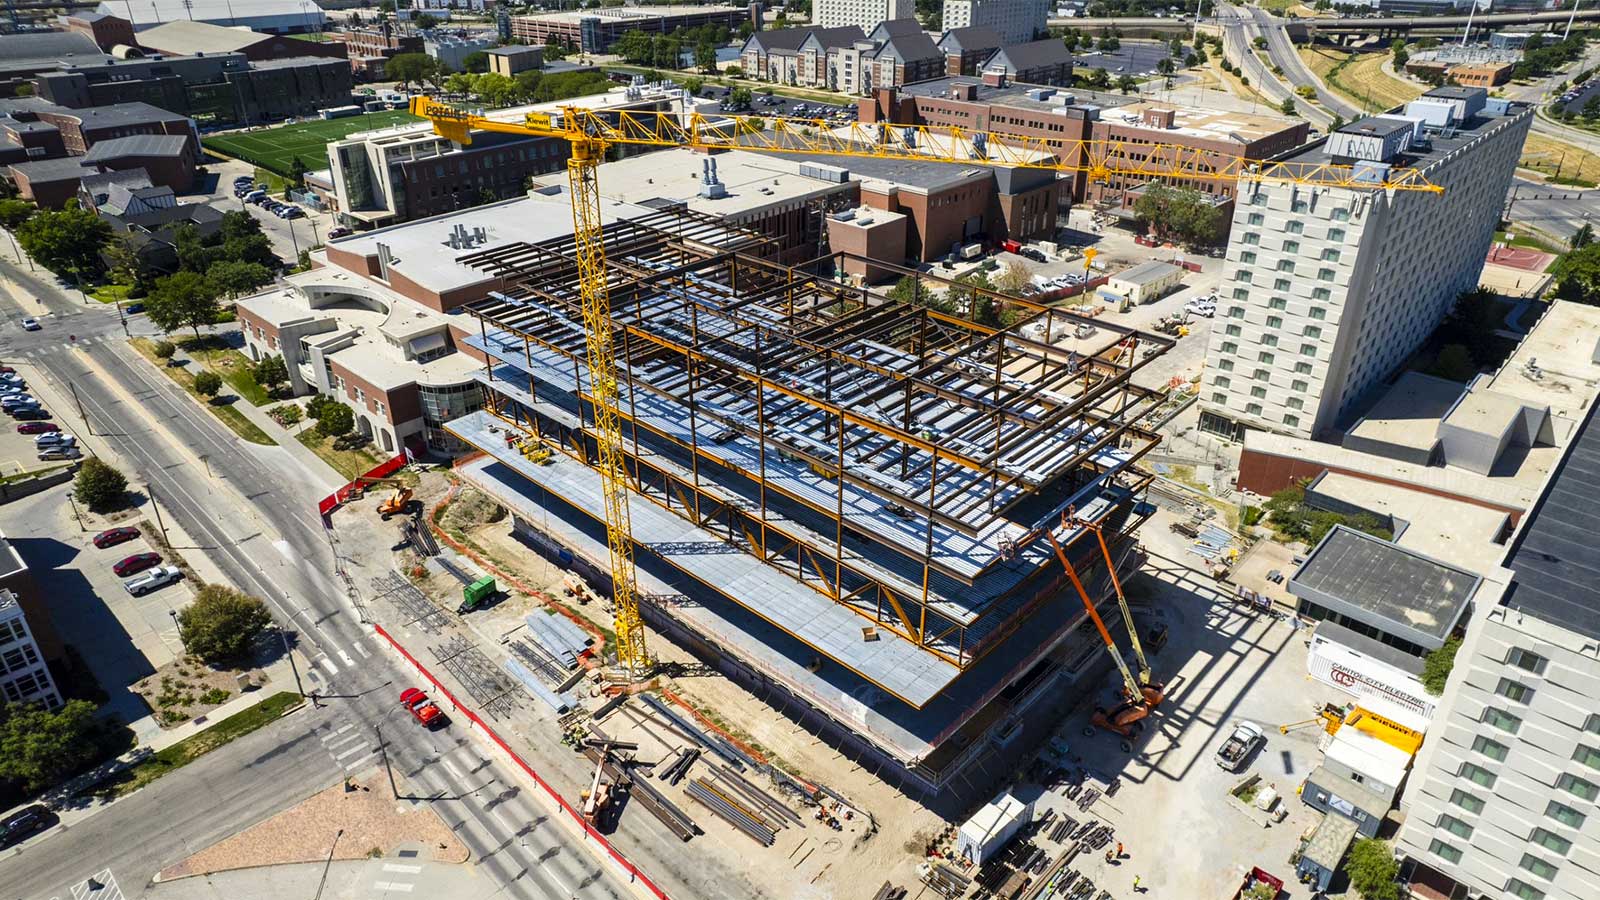 Aerial View of Kiewit Hall (currently under construction).